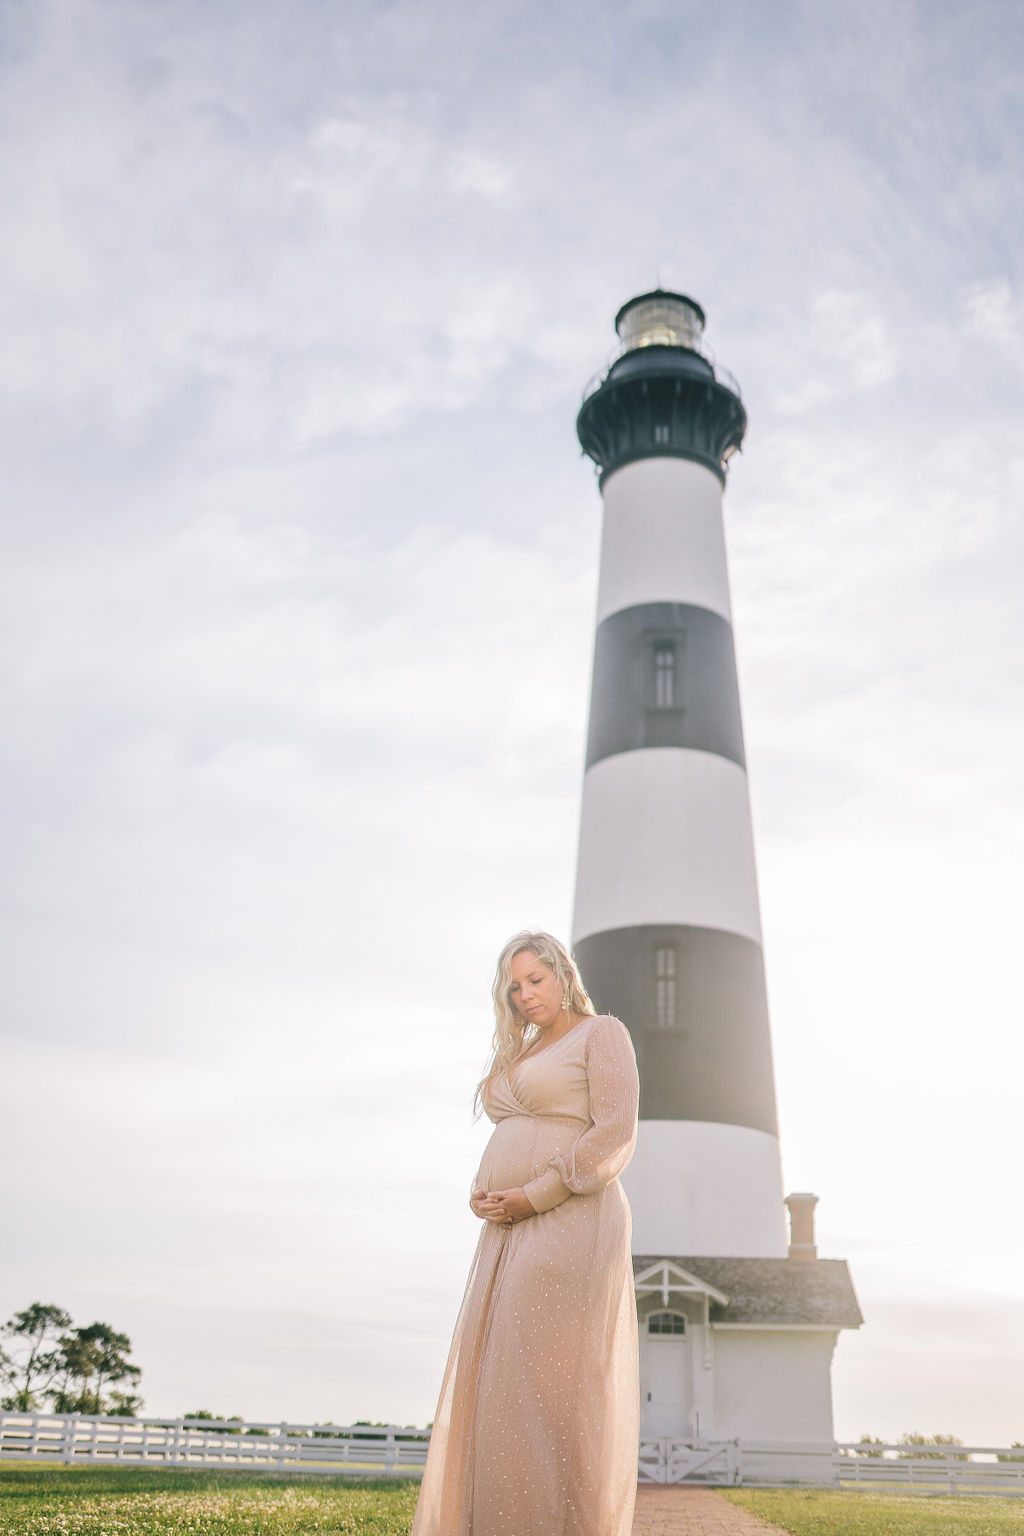 lighthouse maternity session in the outerbanks, the pregnant woman is wearing a blush pink formal gown and is holding her bump in front of a black and white striped lighthouse